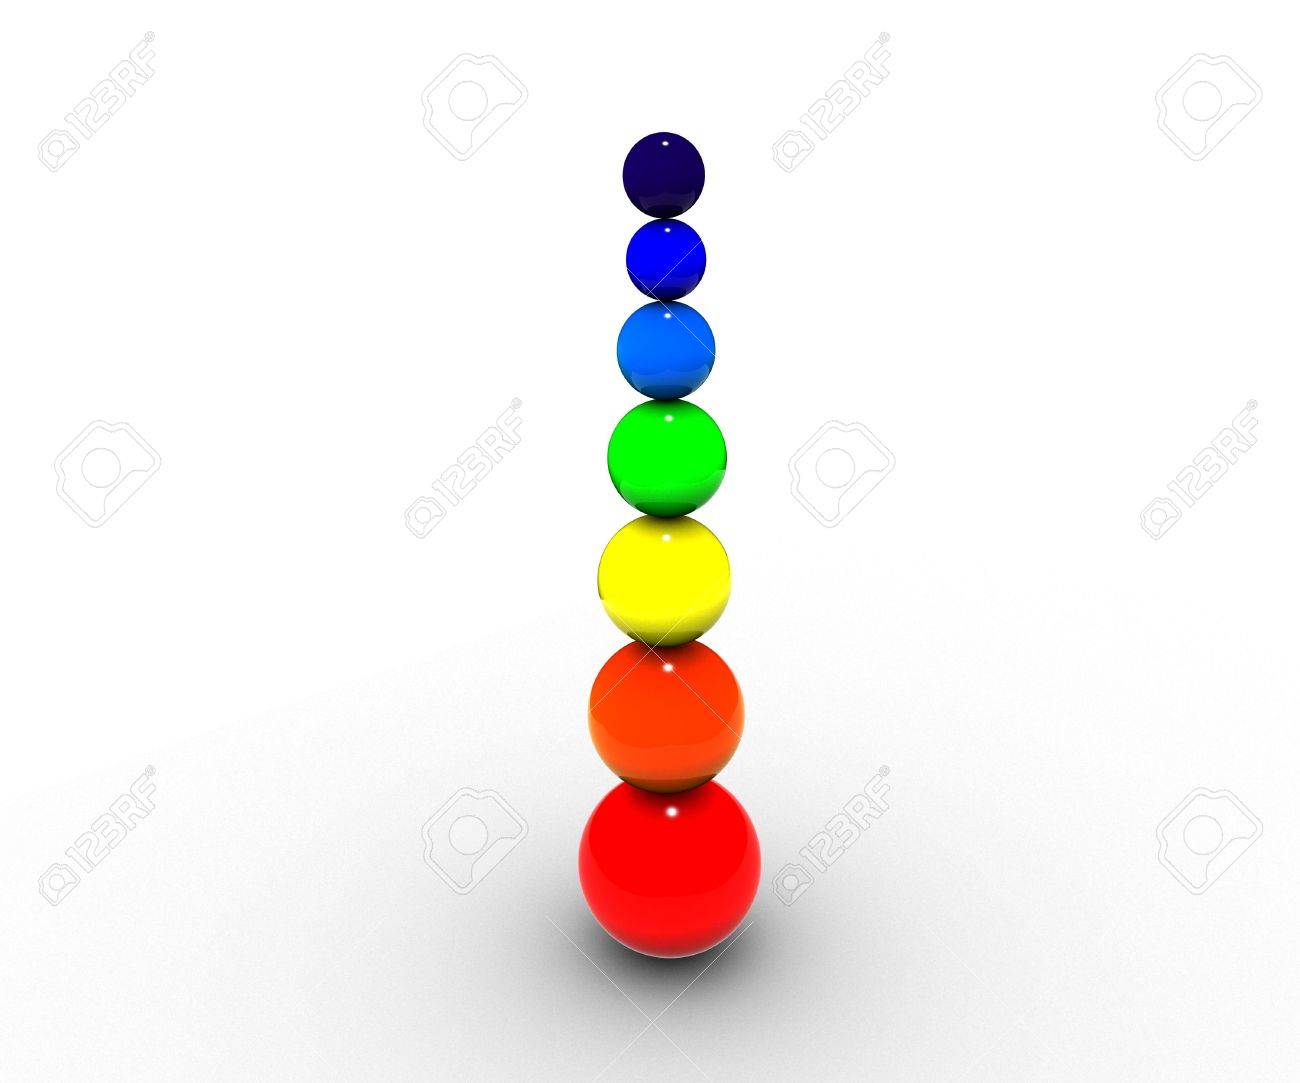 3067357-The-image-of-the-spheres-located-vertically-painted-in-colors-of-a-rainbow-with-increase-in-radius-Stock-Photo.jpg